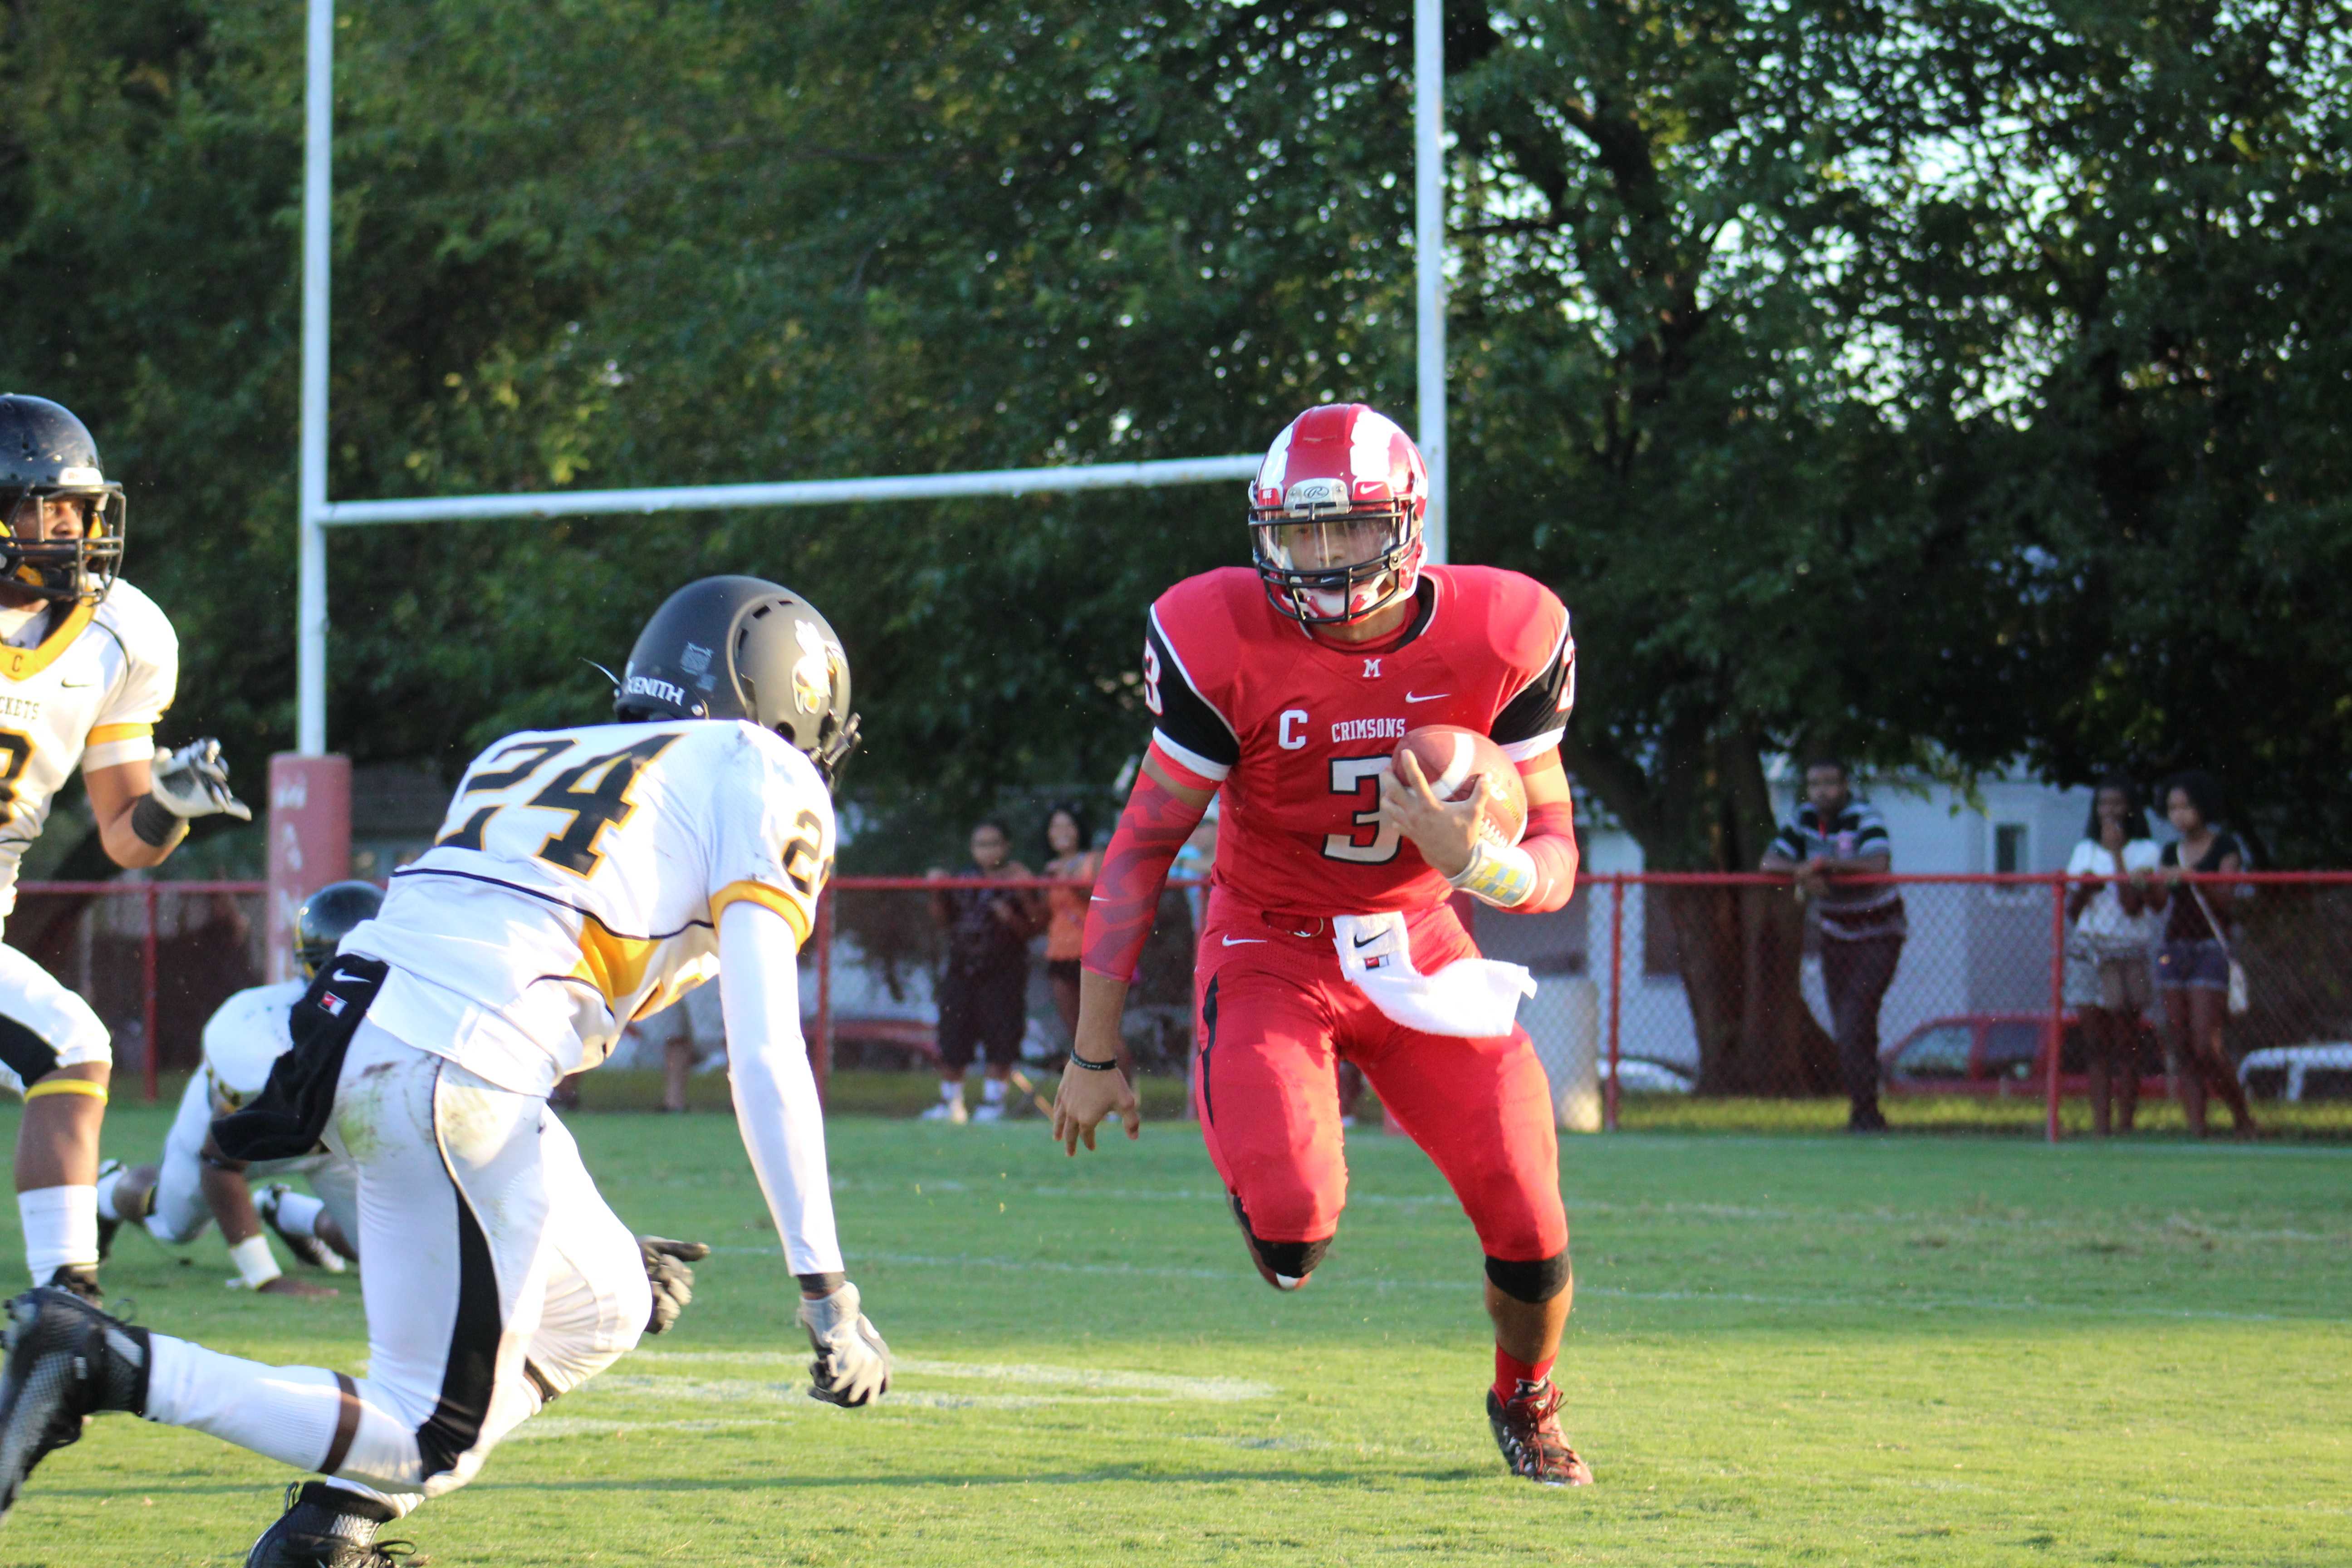 Quarterback Tim Comstock (12, #3) runs for a gain of four at the beginning of the first quarter. Photo by Kate Hatter 